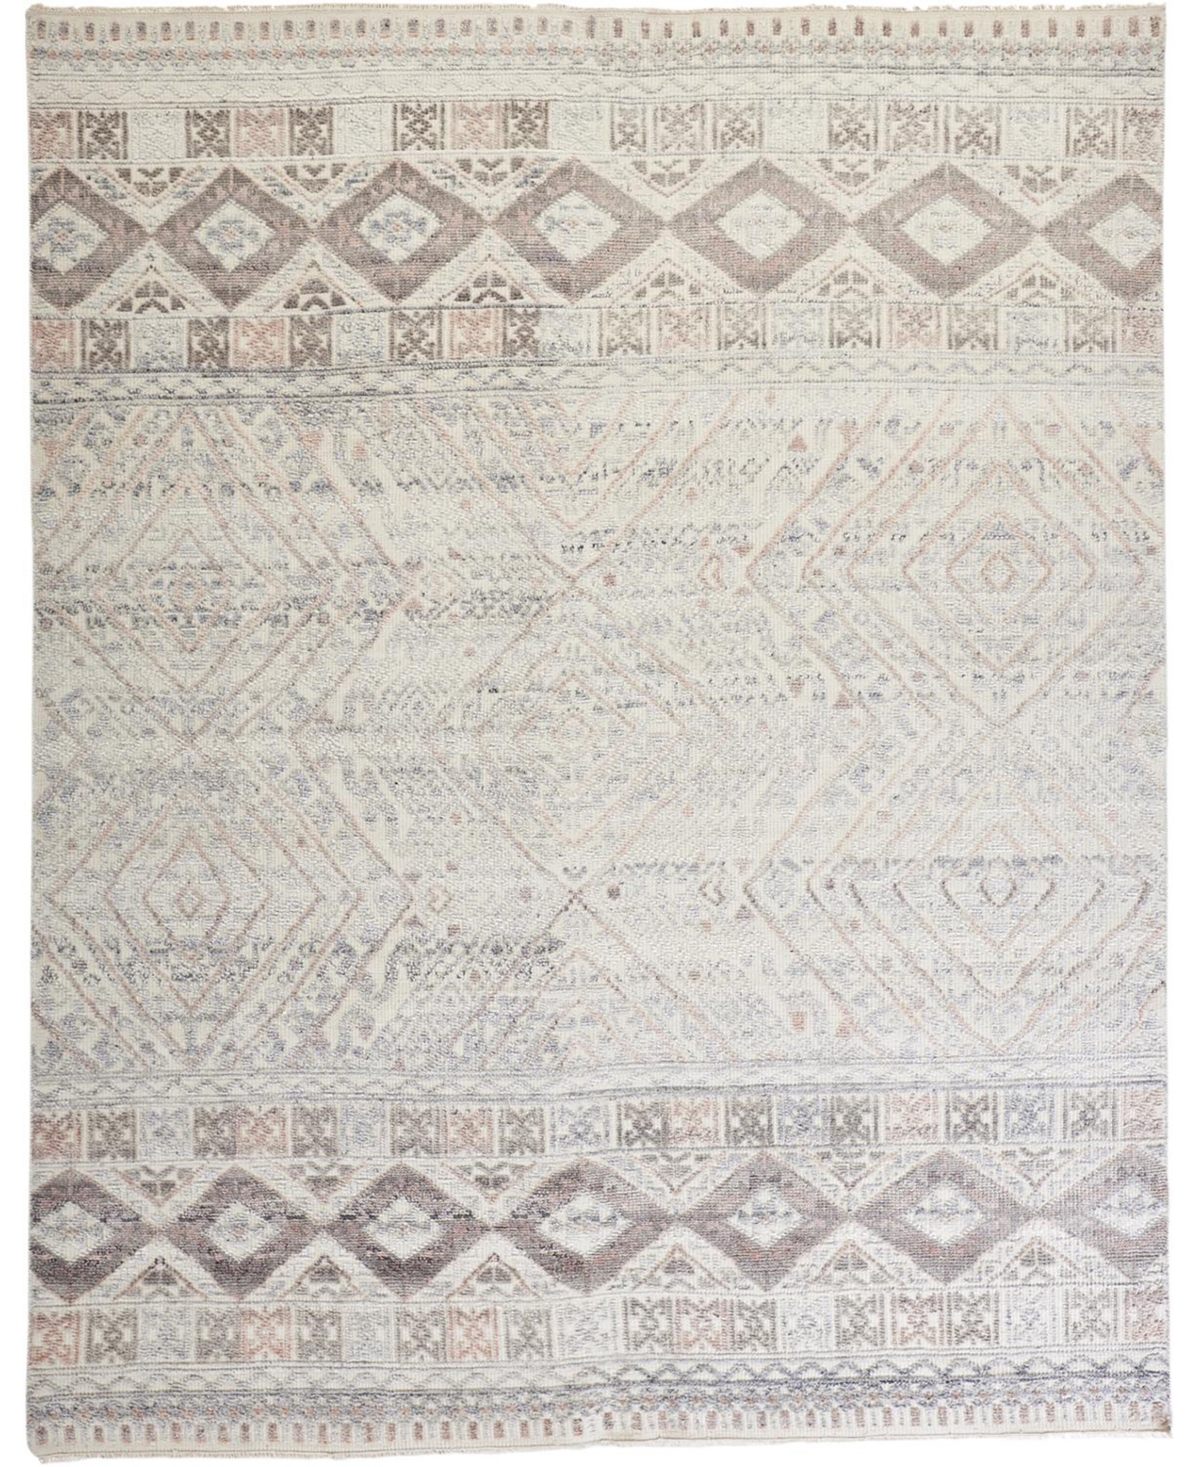 Feizy Esther EST6495 5'6in x 8'6in Area Rug - Ivory, Pink